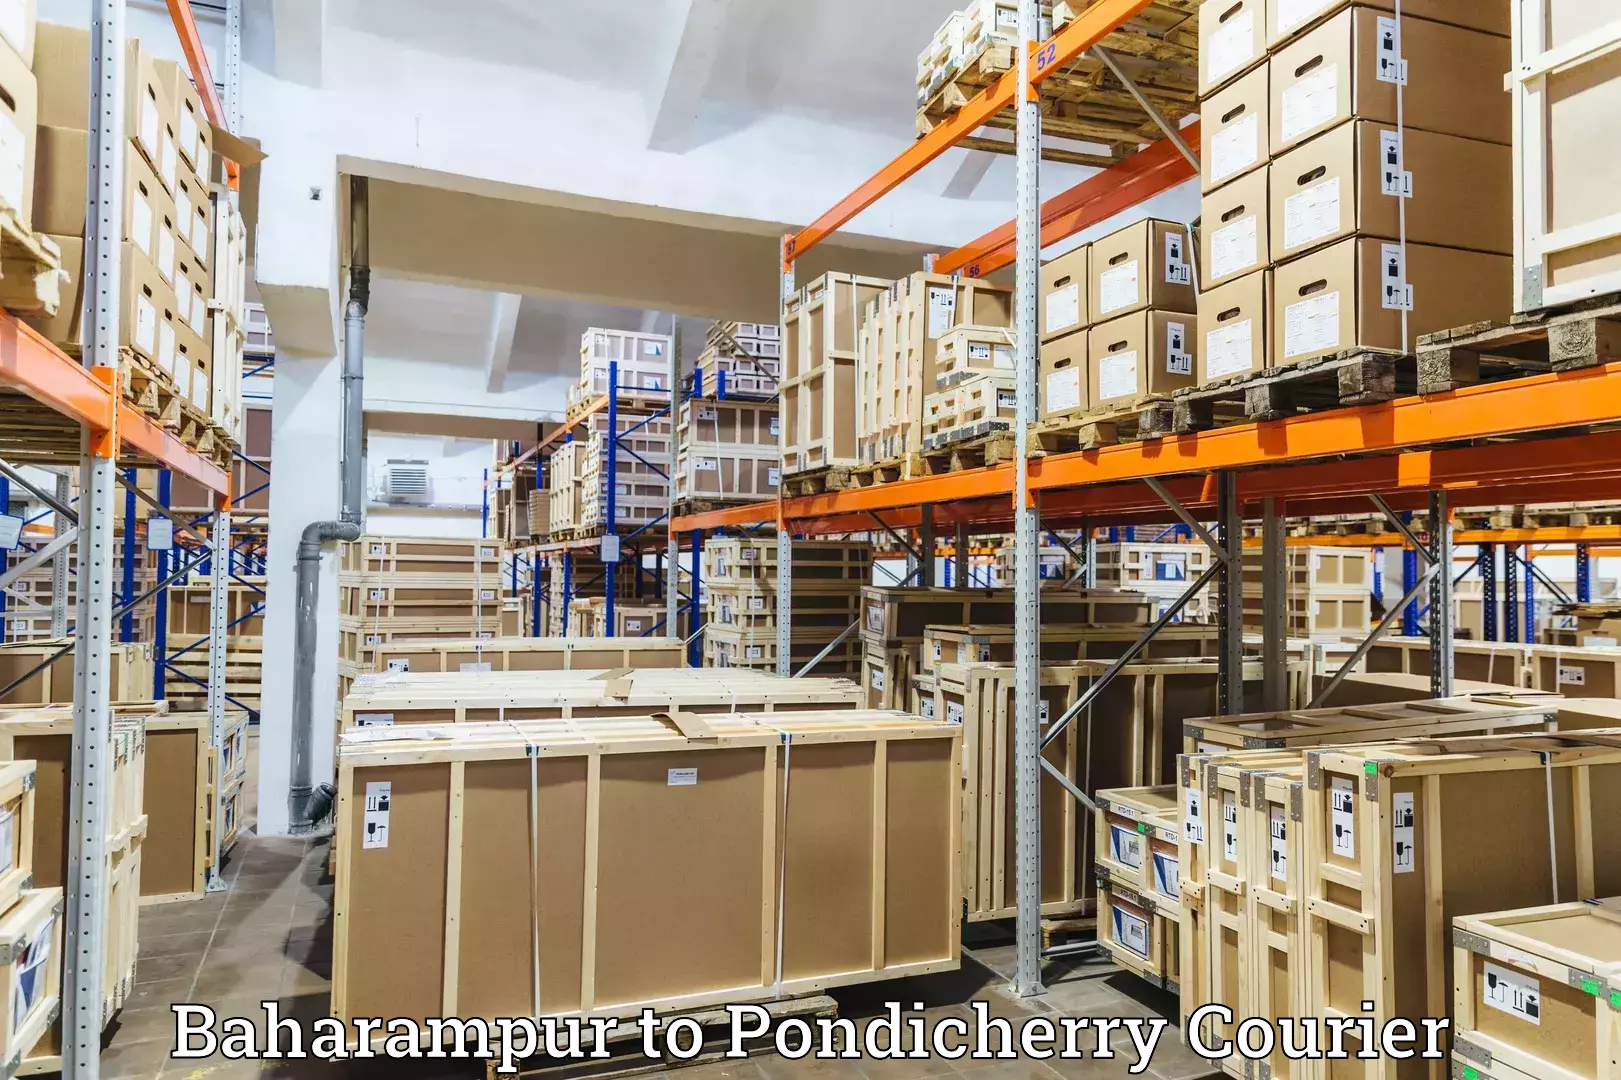 Flexible delivery schedules in Baharampur to Pondicherry